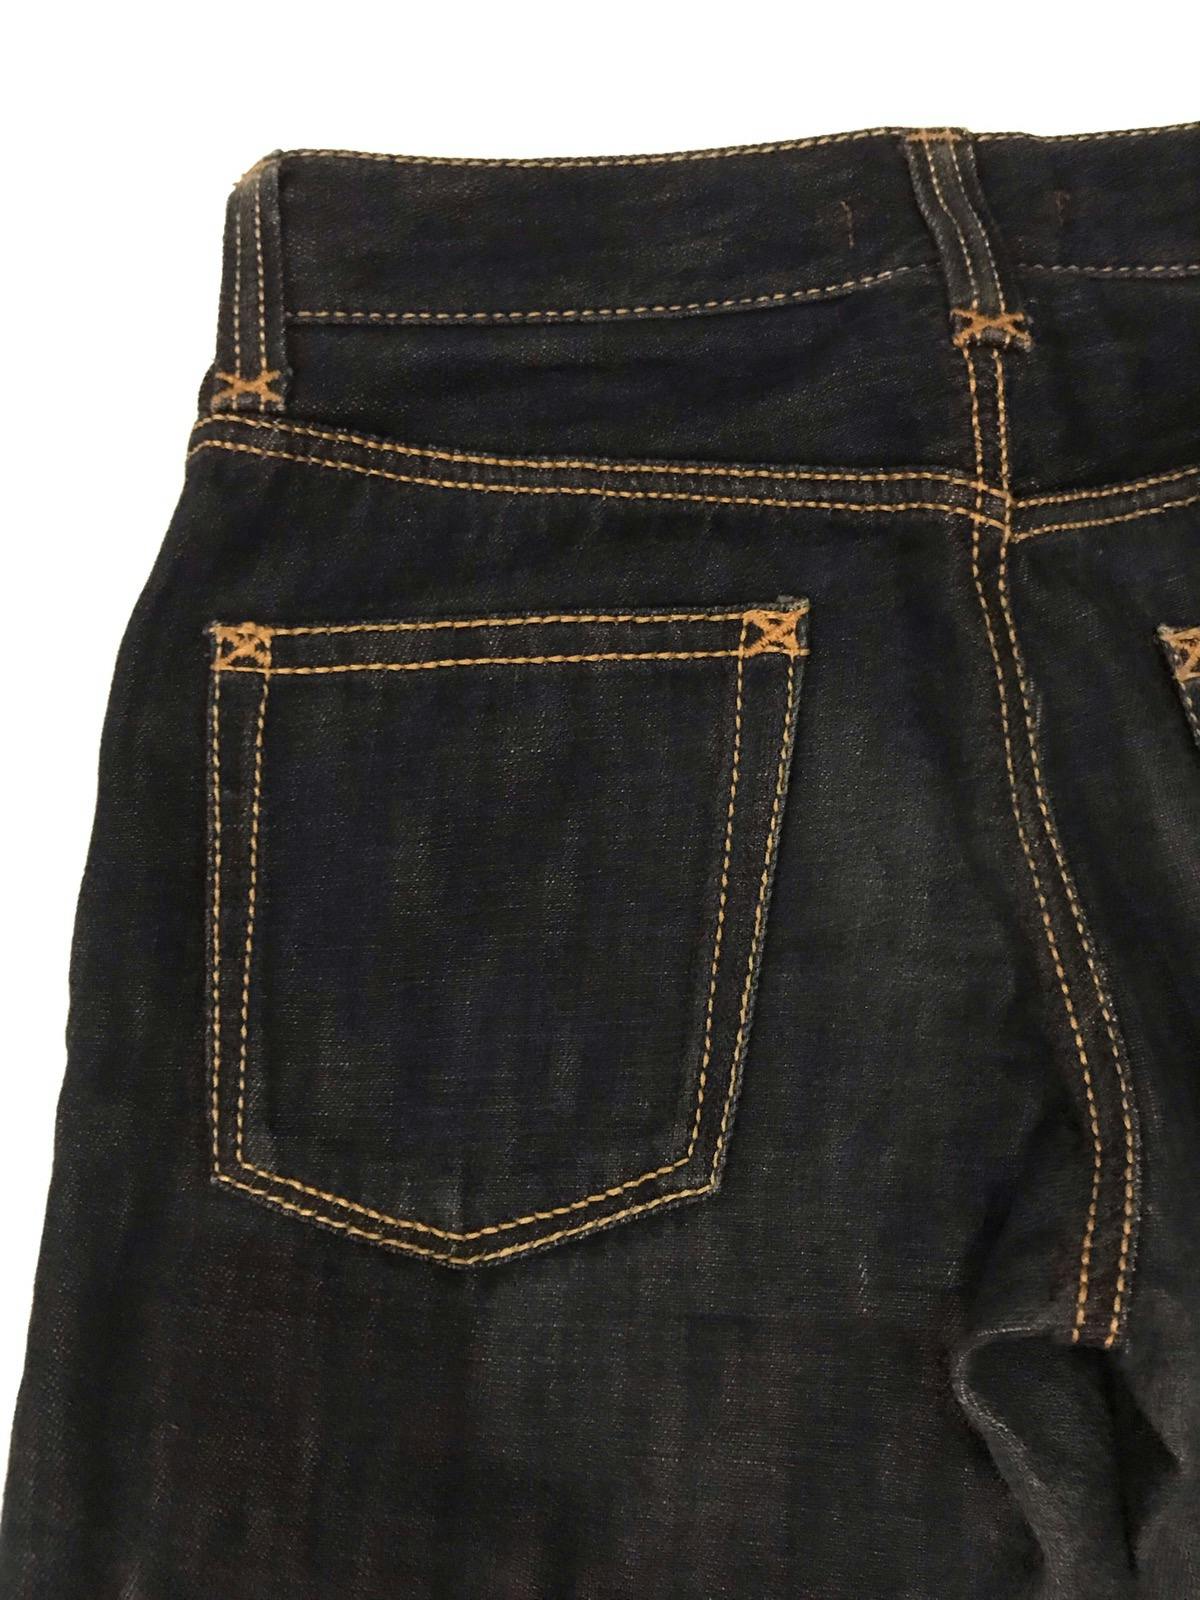 Dolce & Gabanna D&G 17 Loose Denim Jeans Made in Italy 🇮🇹 - 10